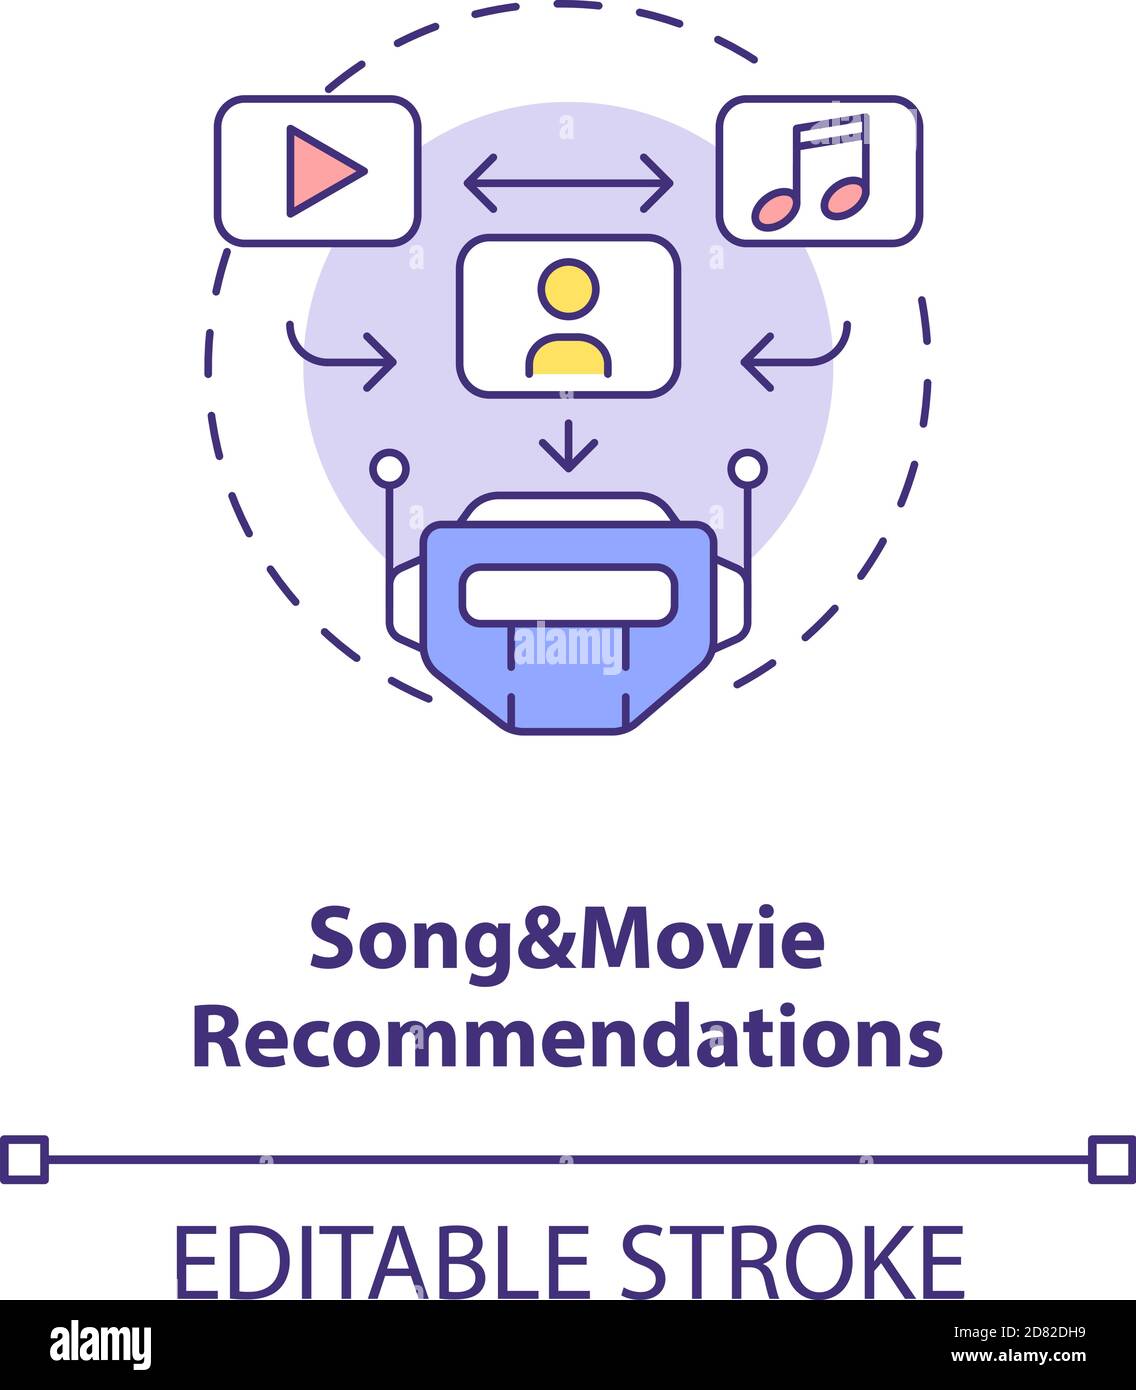 Song and movie recommendations concept icon Stock Vector